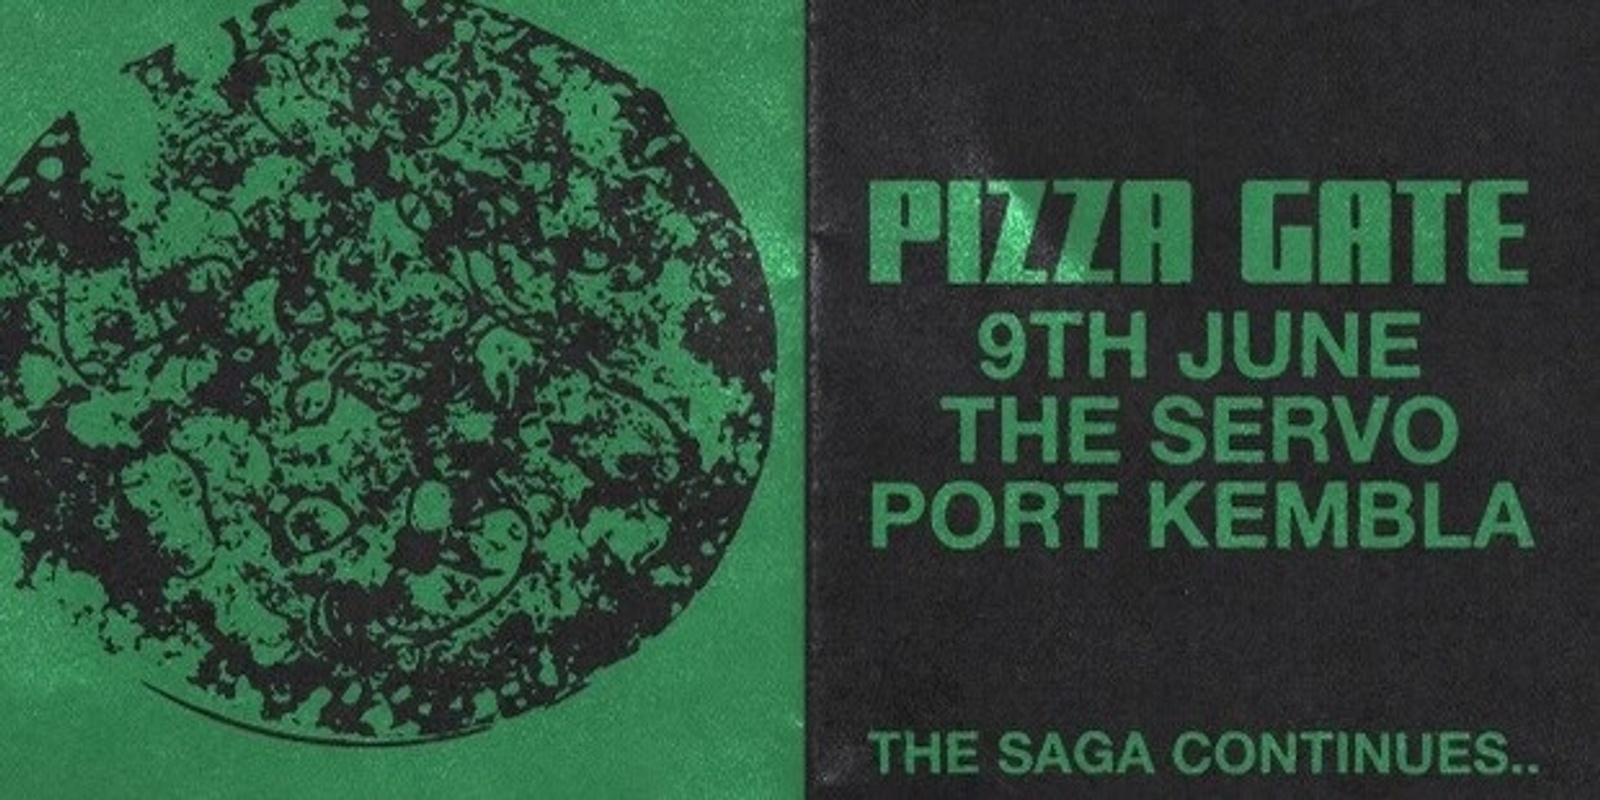 Banner image for PIZZA GATE 